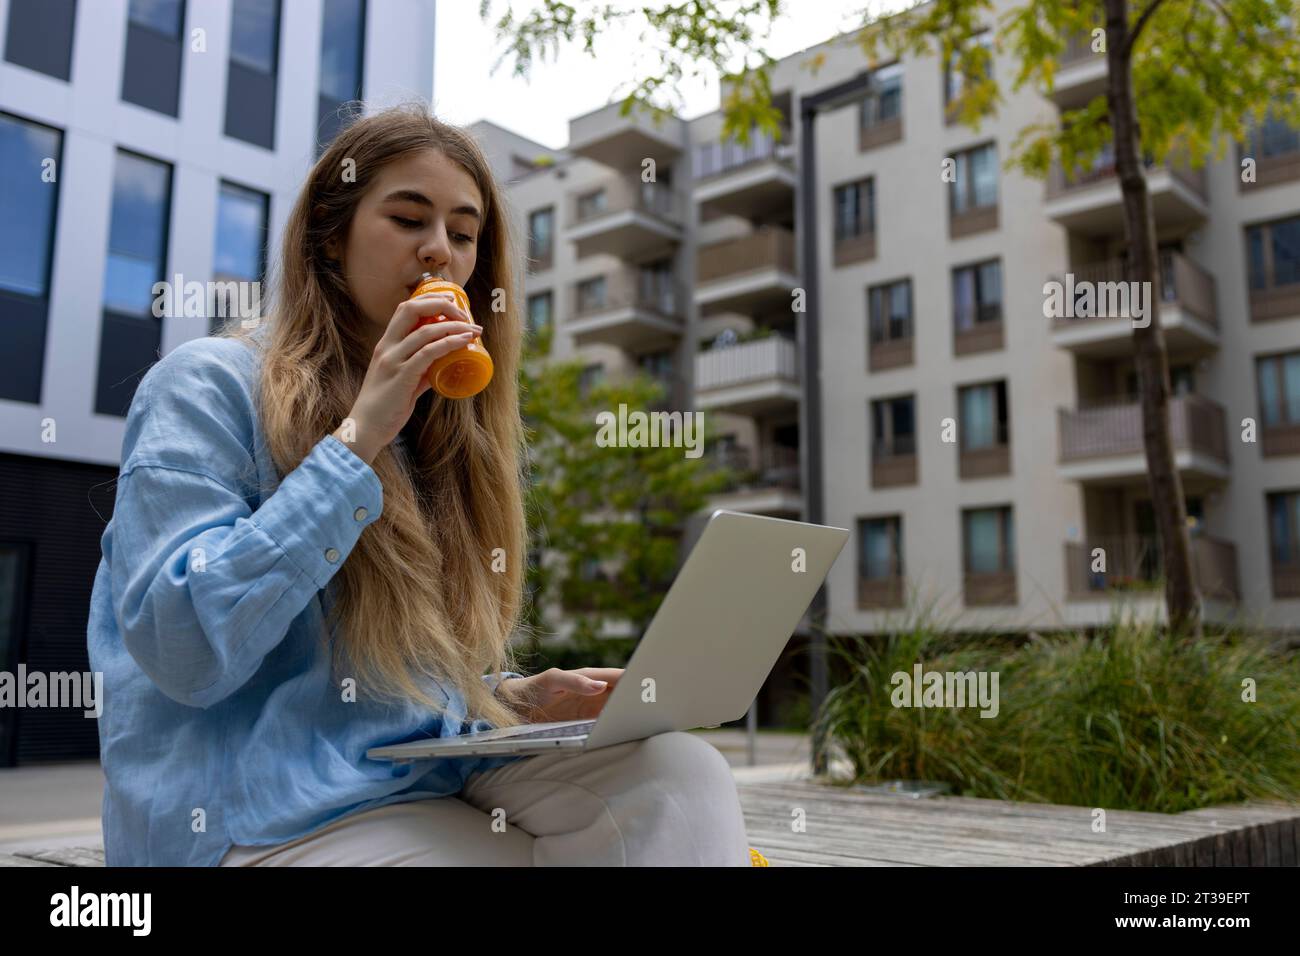 Young blond-haired student drinking orange juice and working in her laptop in urban place. Stock Photo